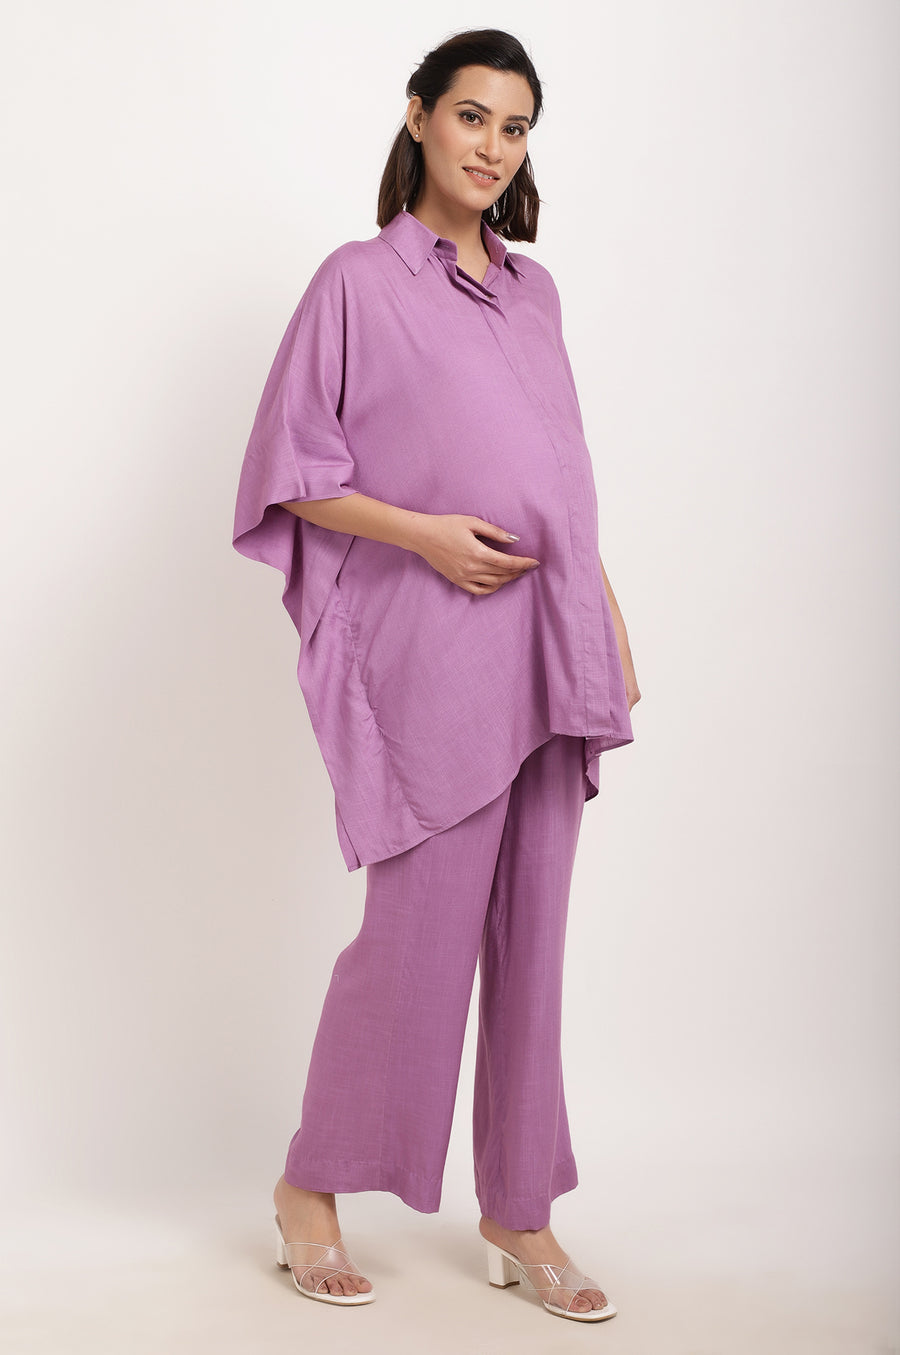 affordable maternity wear